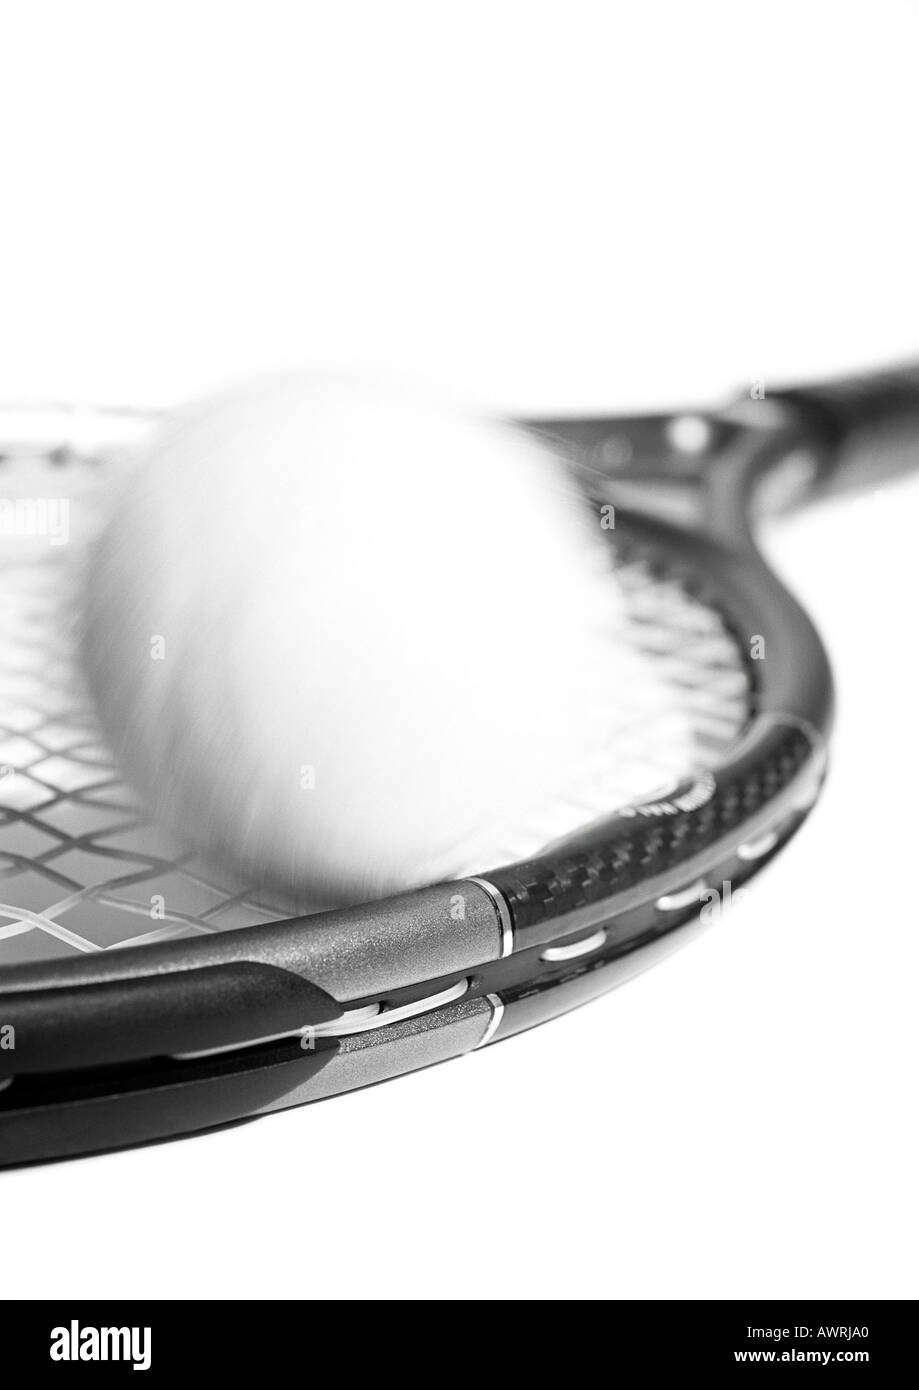 Tennis racket and ball, blurred, close-up, b&w. Stock Photo